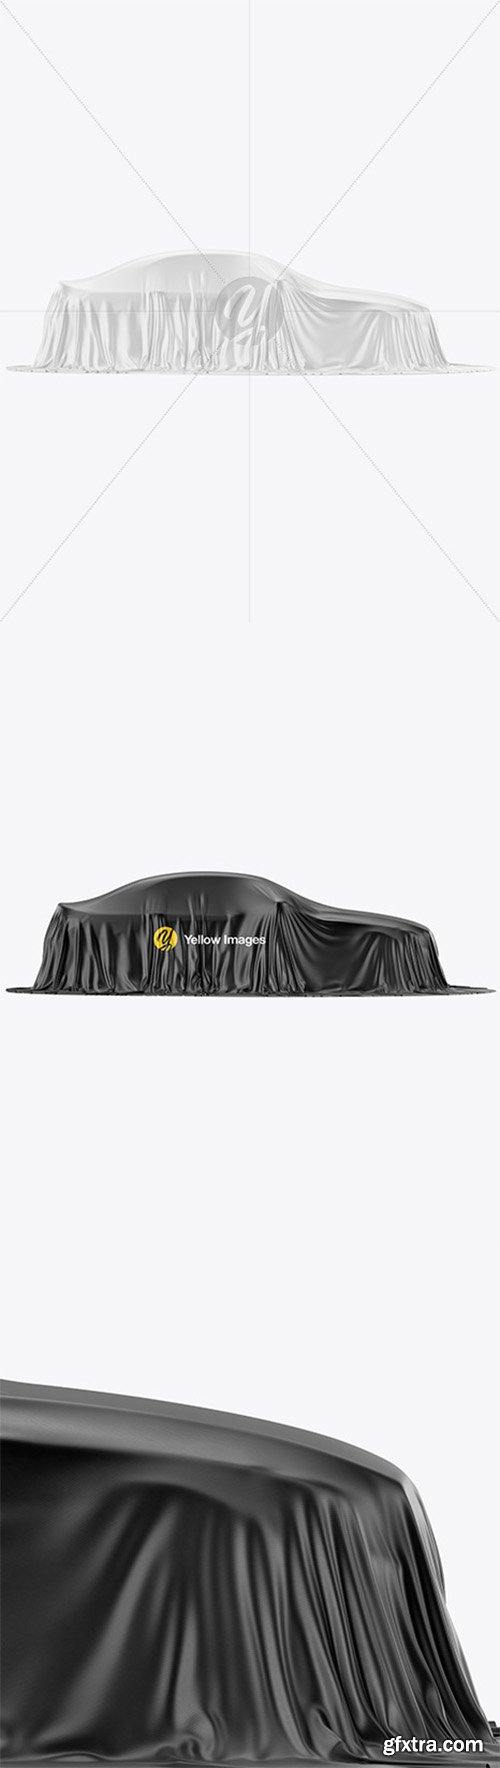 Download Car Cover Mockup Download Free And Premium Psd Mockup Templates And Design Assets Yellowimages Mockups